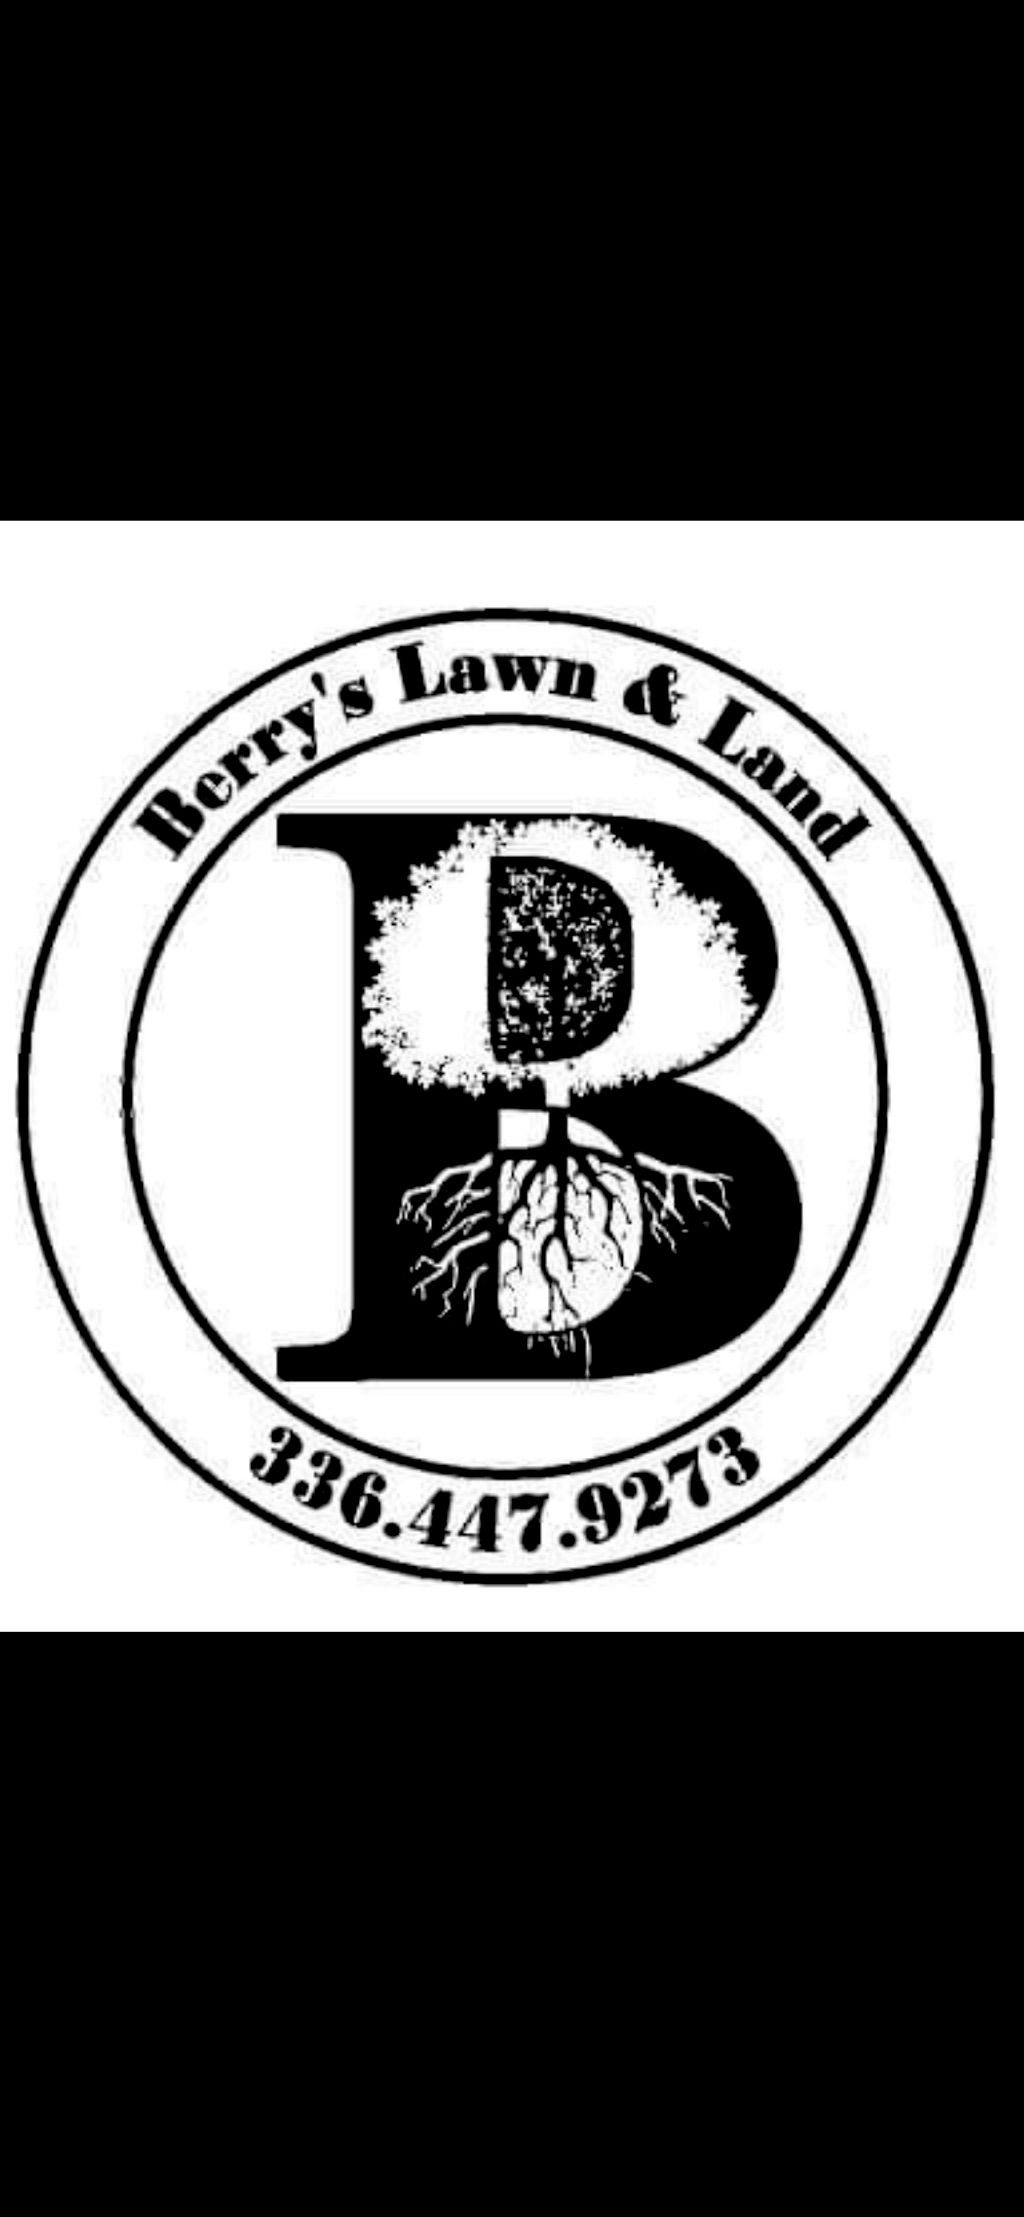 Berry’s lawn & landscaping